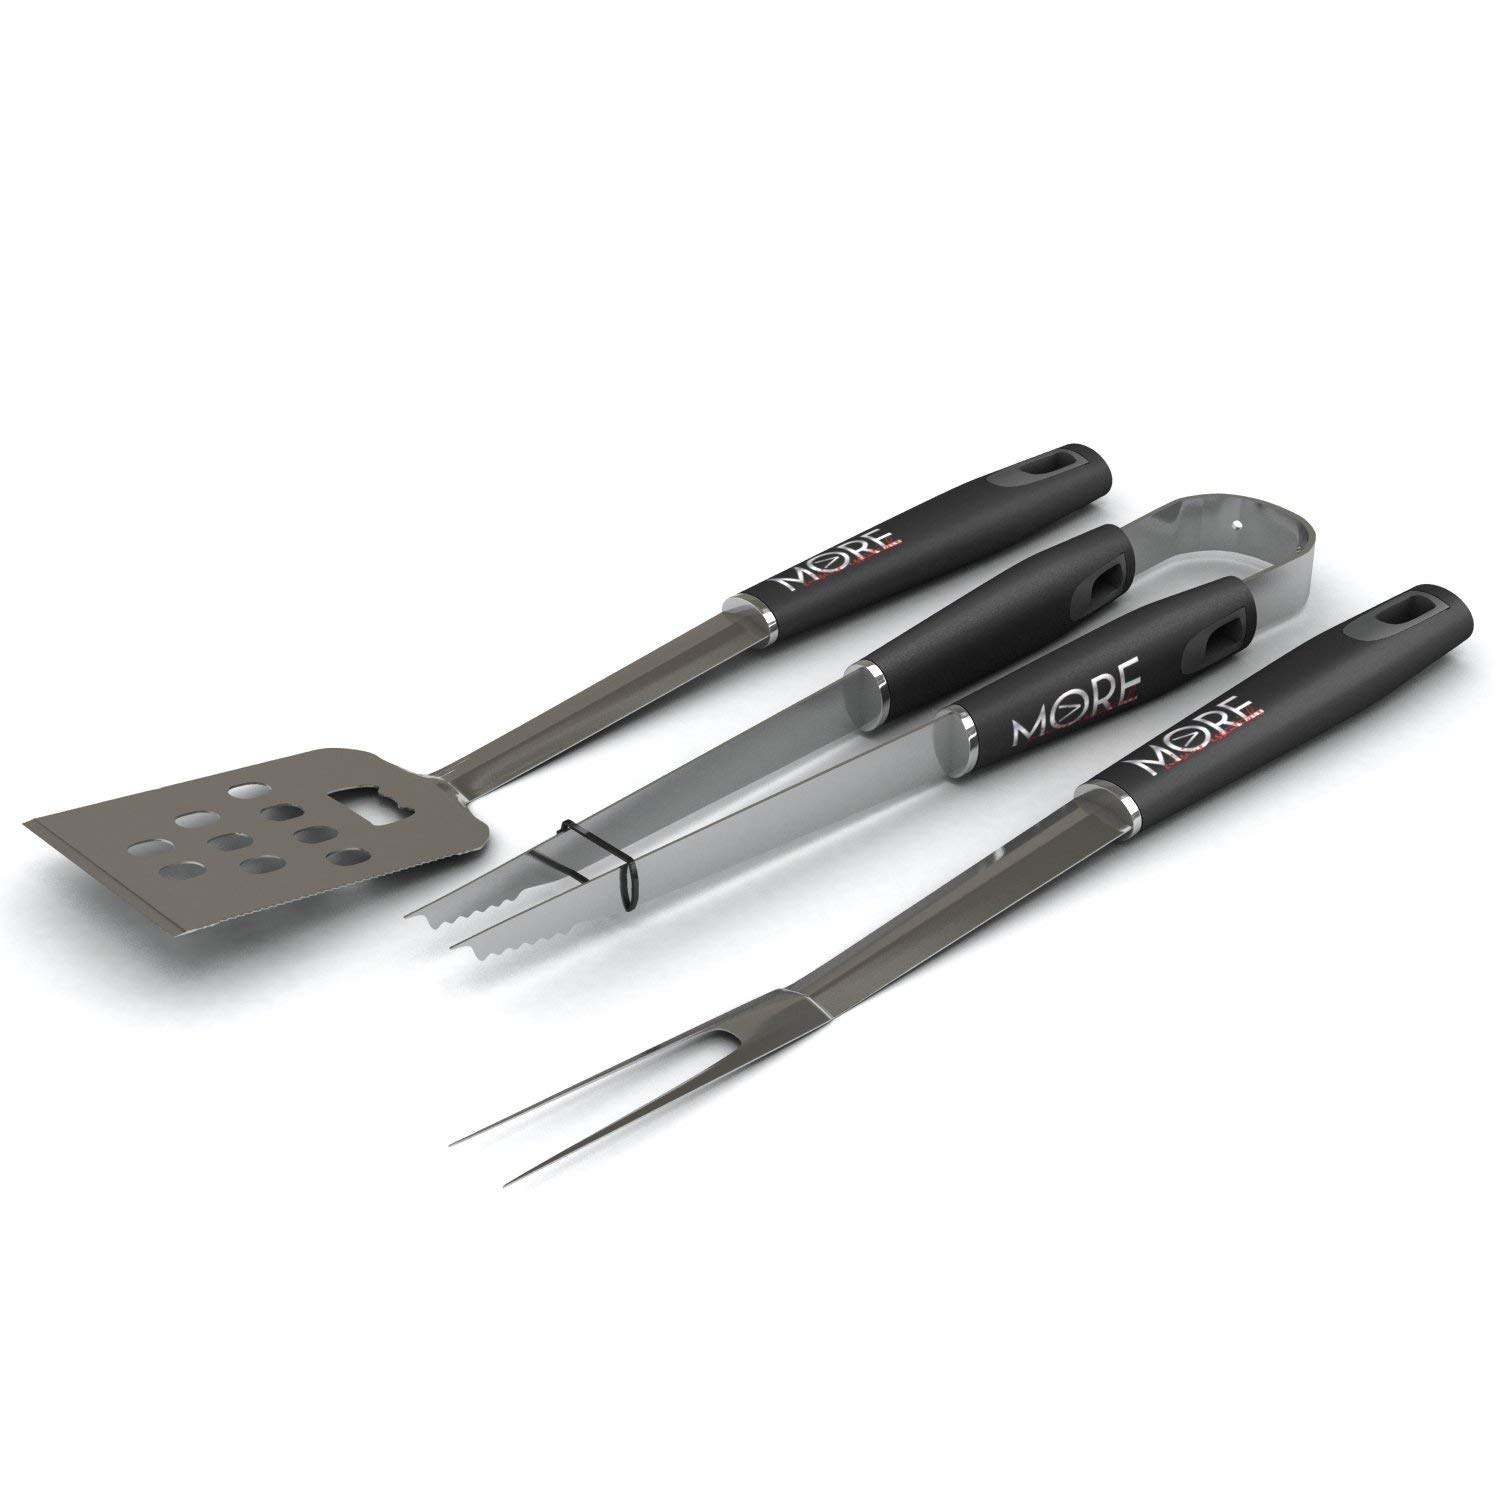 3-Piece BBQ Set - Heavy Duty Stainless Steel BBQ Tool Set - BBQ RECIPE eBook - Dozens of Amazing Grilling Recipes - BBQ Accessories for Grilling Like a BOSS. Great for Electric, Gas, & Outdoor Grills - image 5 of 7